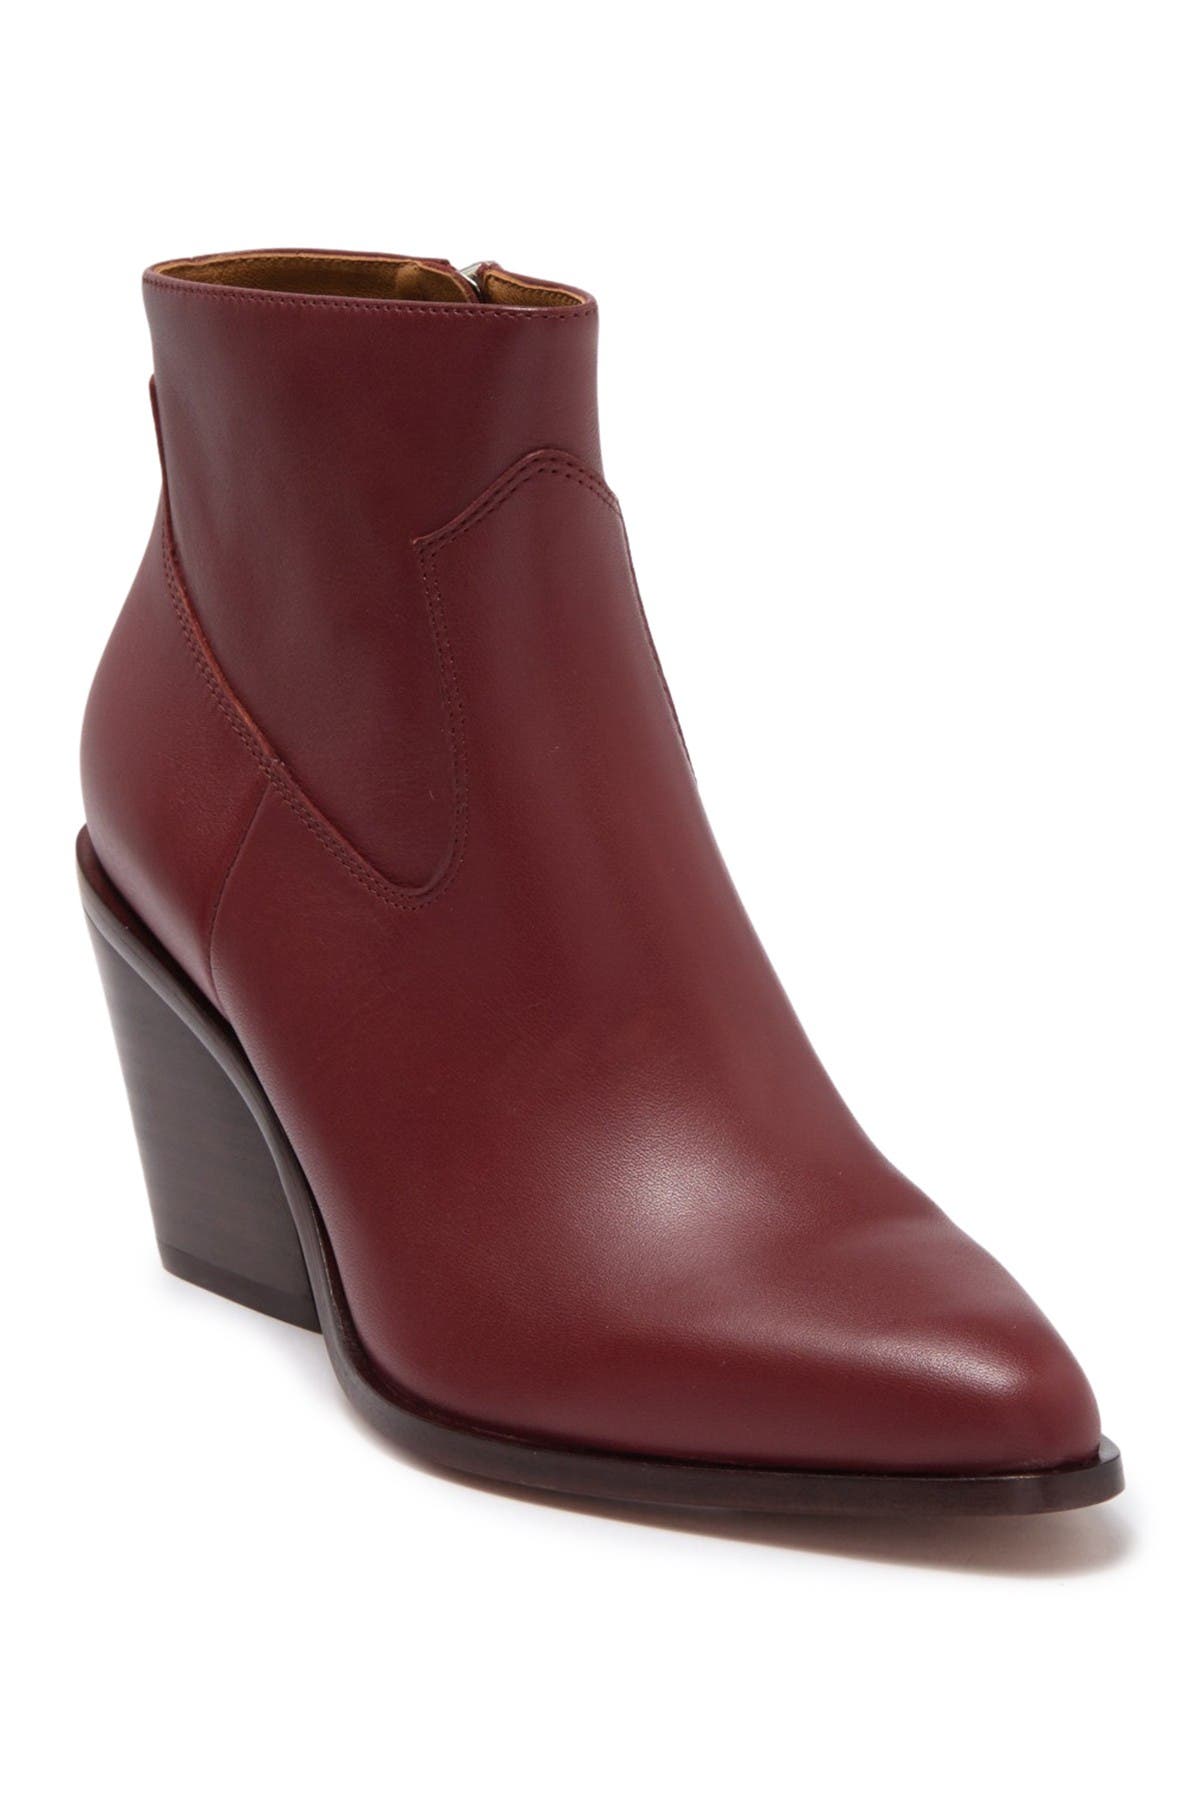 rag and bone leather ankle boots